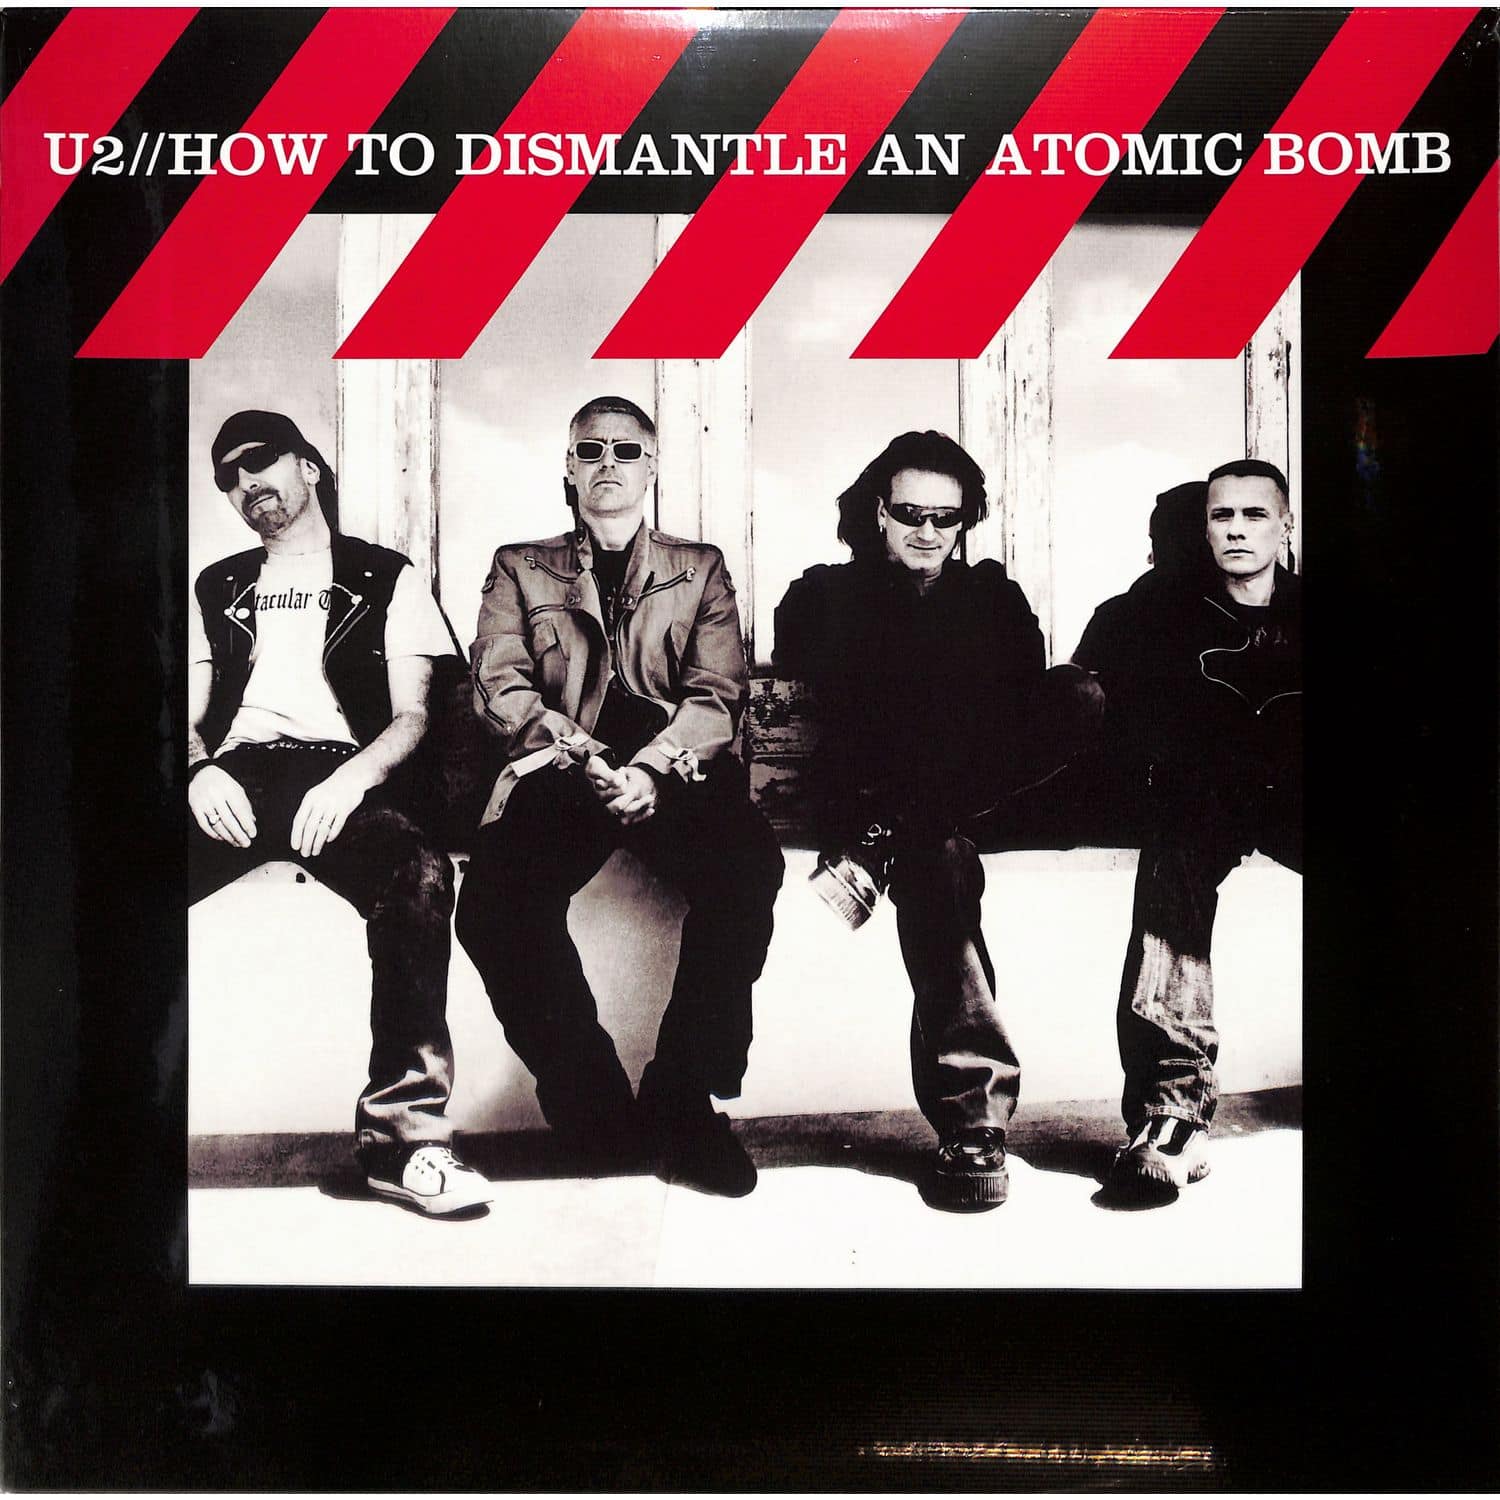 U2 - HOW TO DISMANTLE AN ATOMIC BOMB 